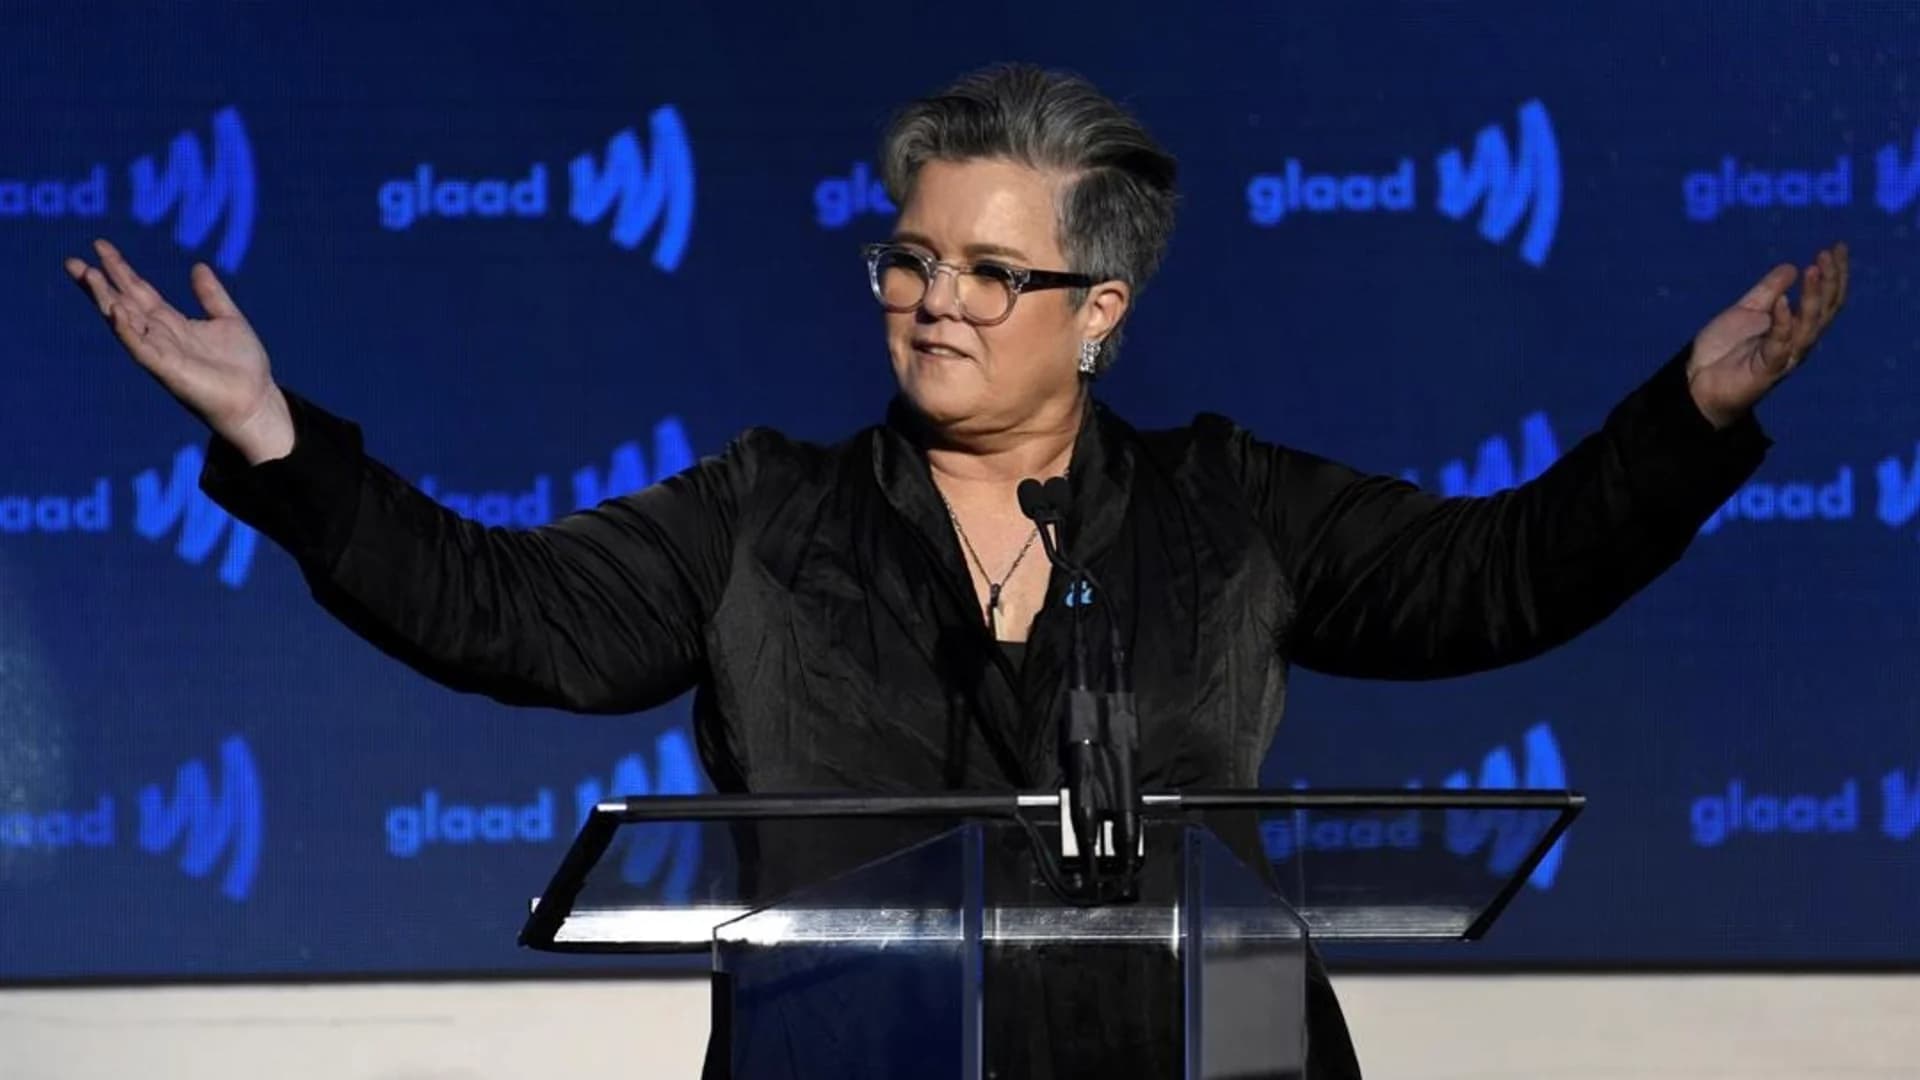 Rosie O’Donnell to revive talk show to benefit Broadway community